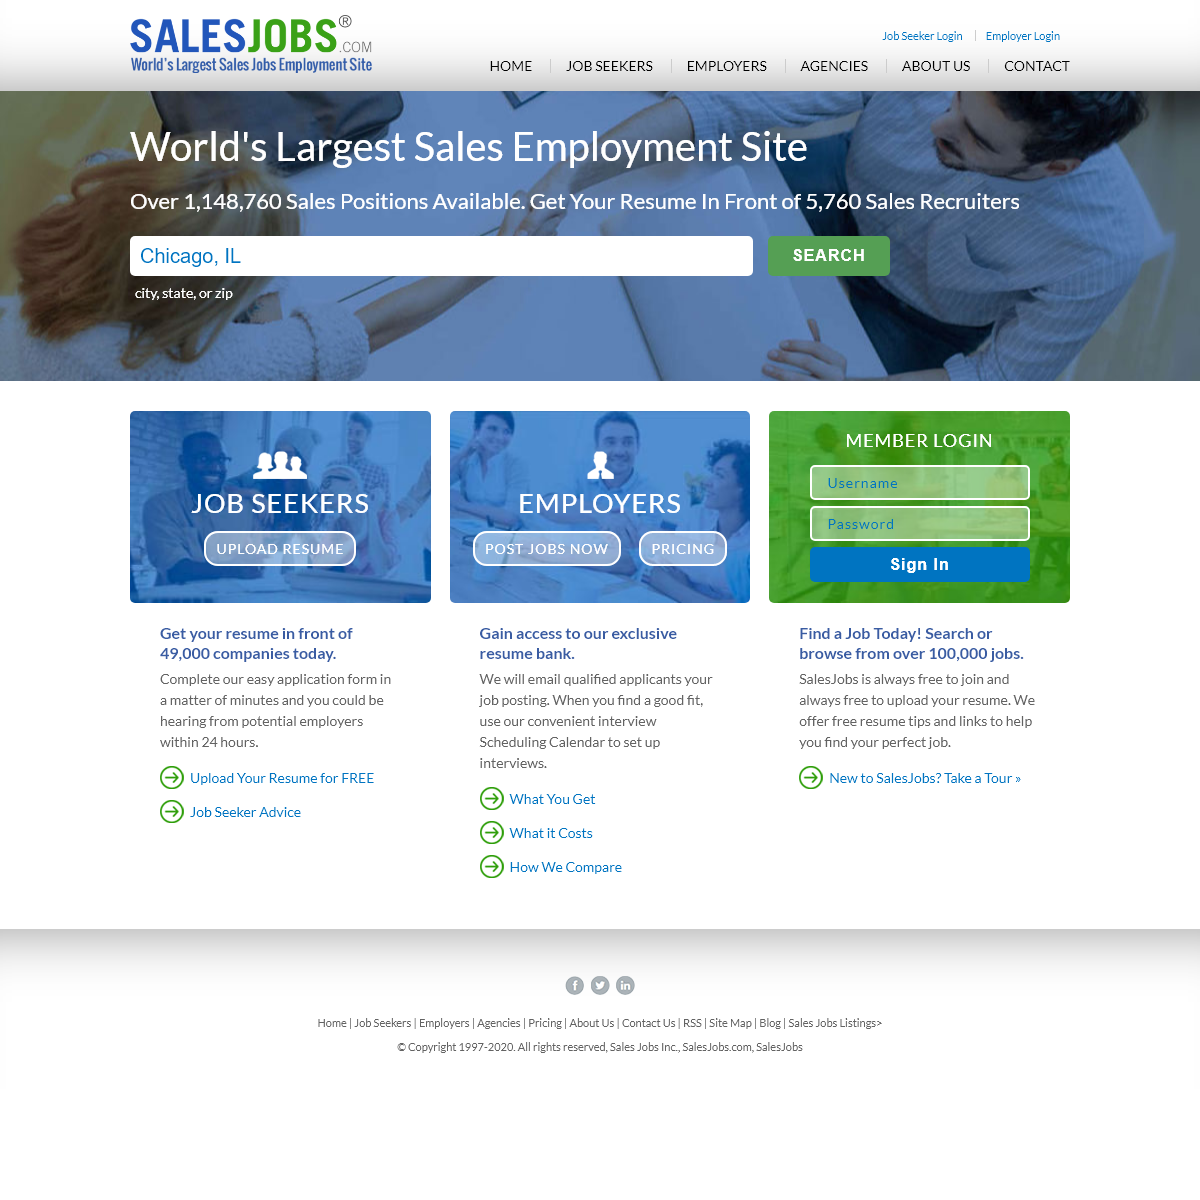 A complete backup of salesjobs.com